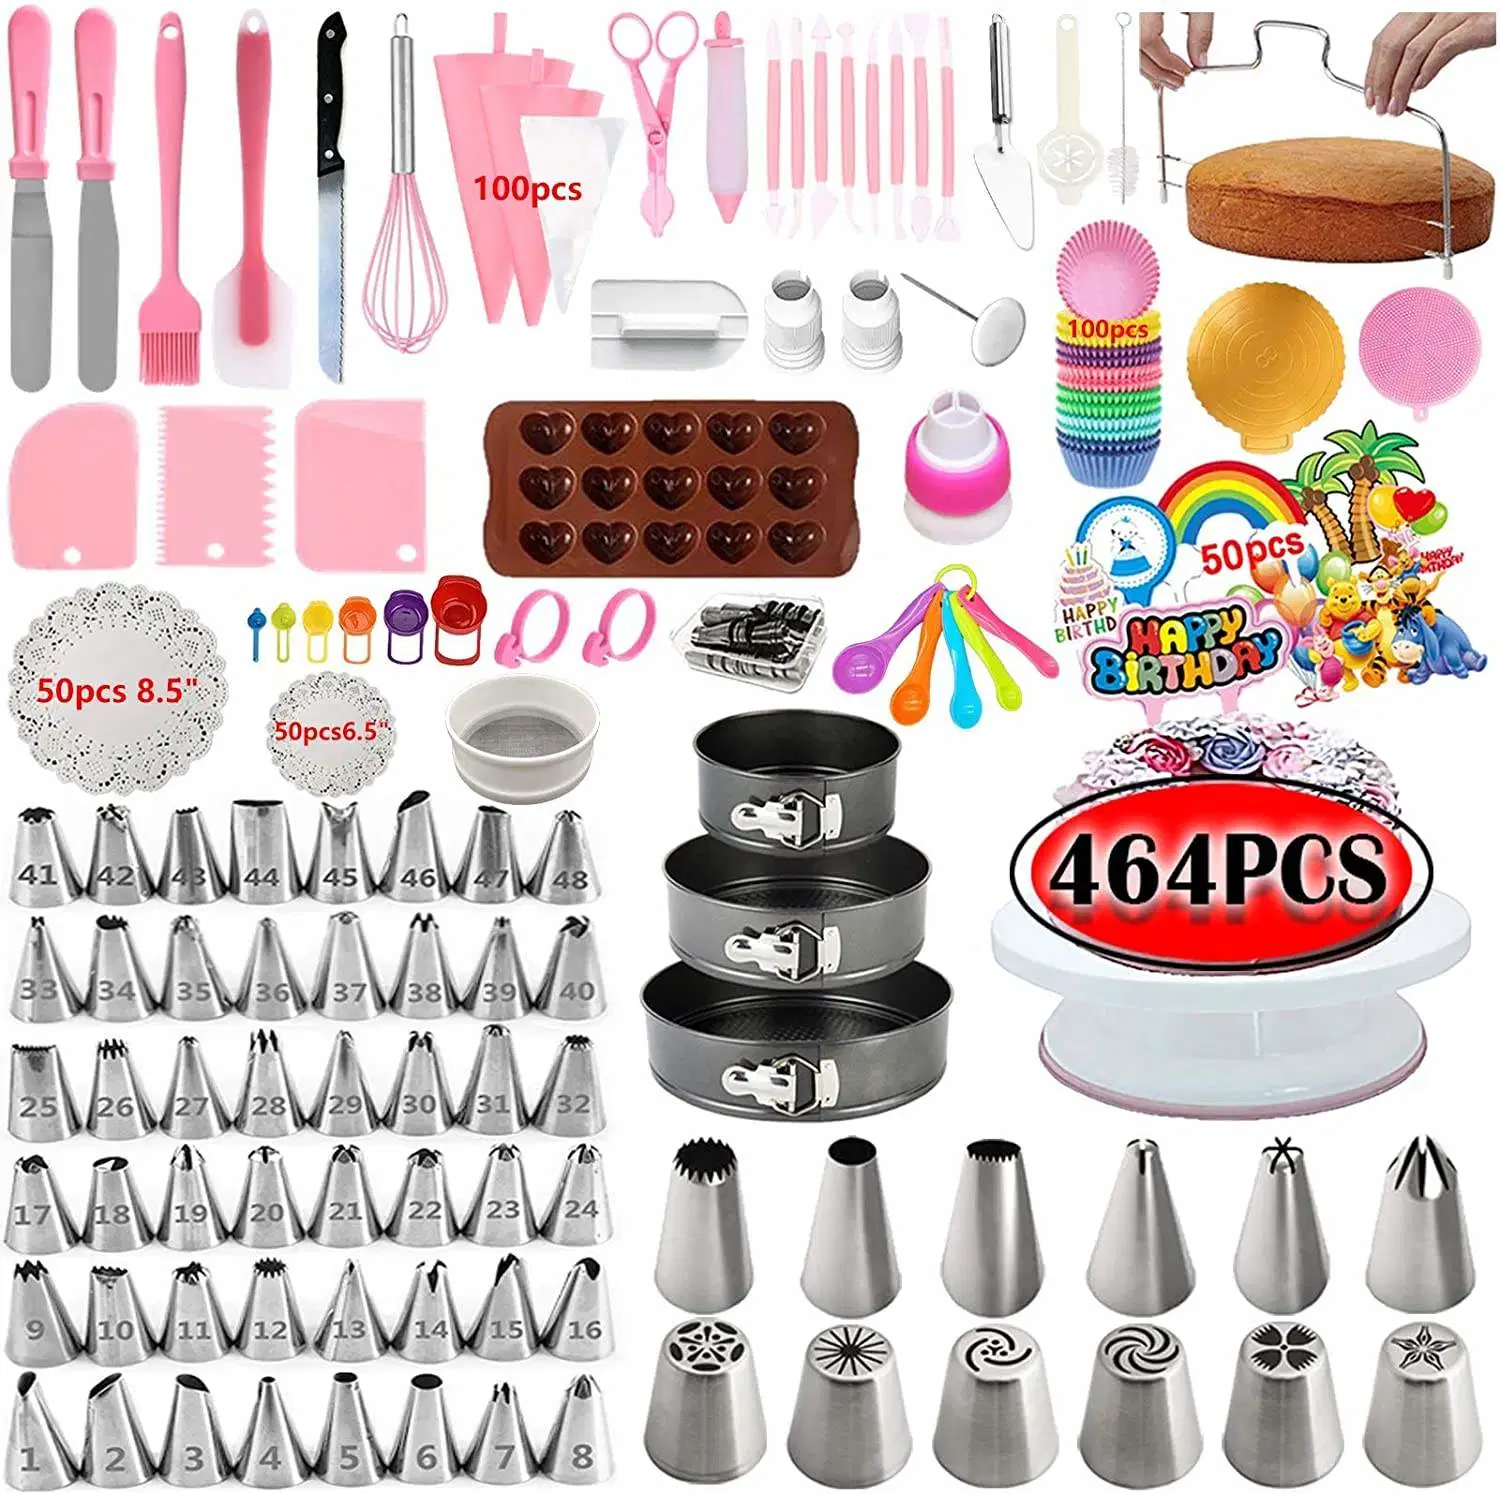 Factory Top Quality Full Set 464 PCS Baking Supplies Decorating Tools Baking Accessories